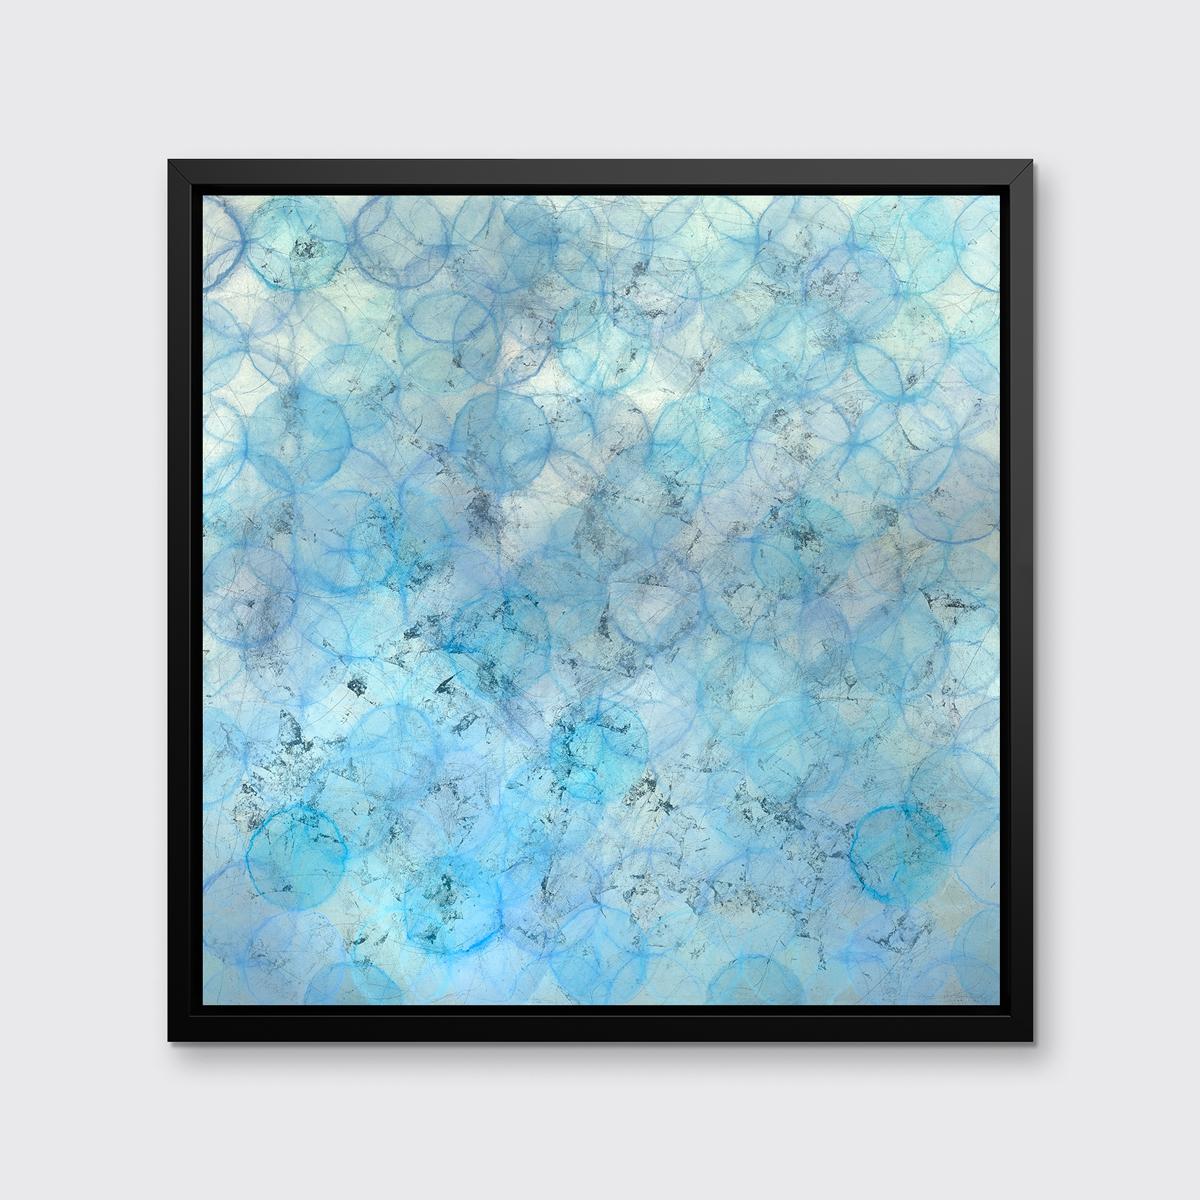 This abstract limited edition print by Roger Mudre features a light blue and silver palette, with warm, subtle pops of lavender layered throughout. Light outlined circular shapes are layered over one another and span out past the edges of the